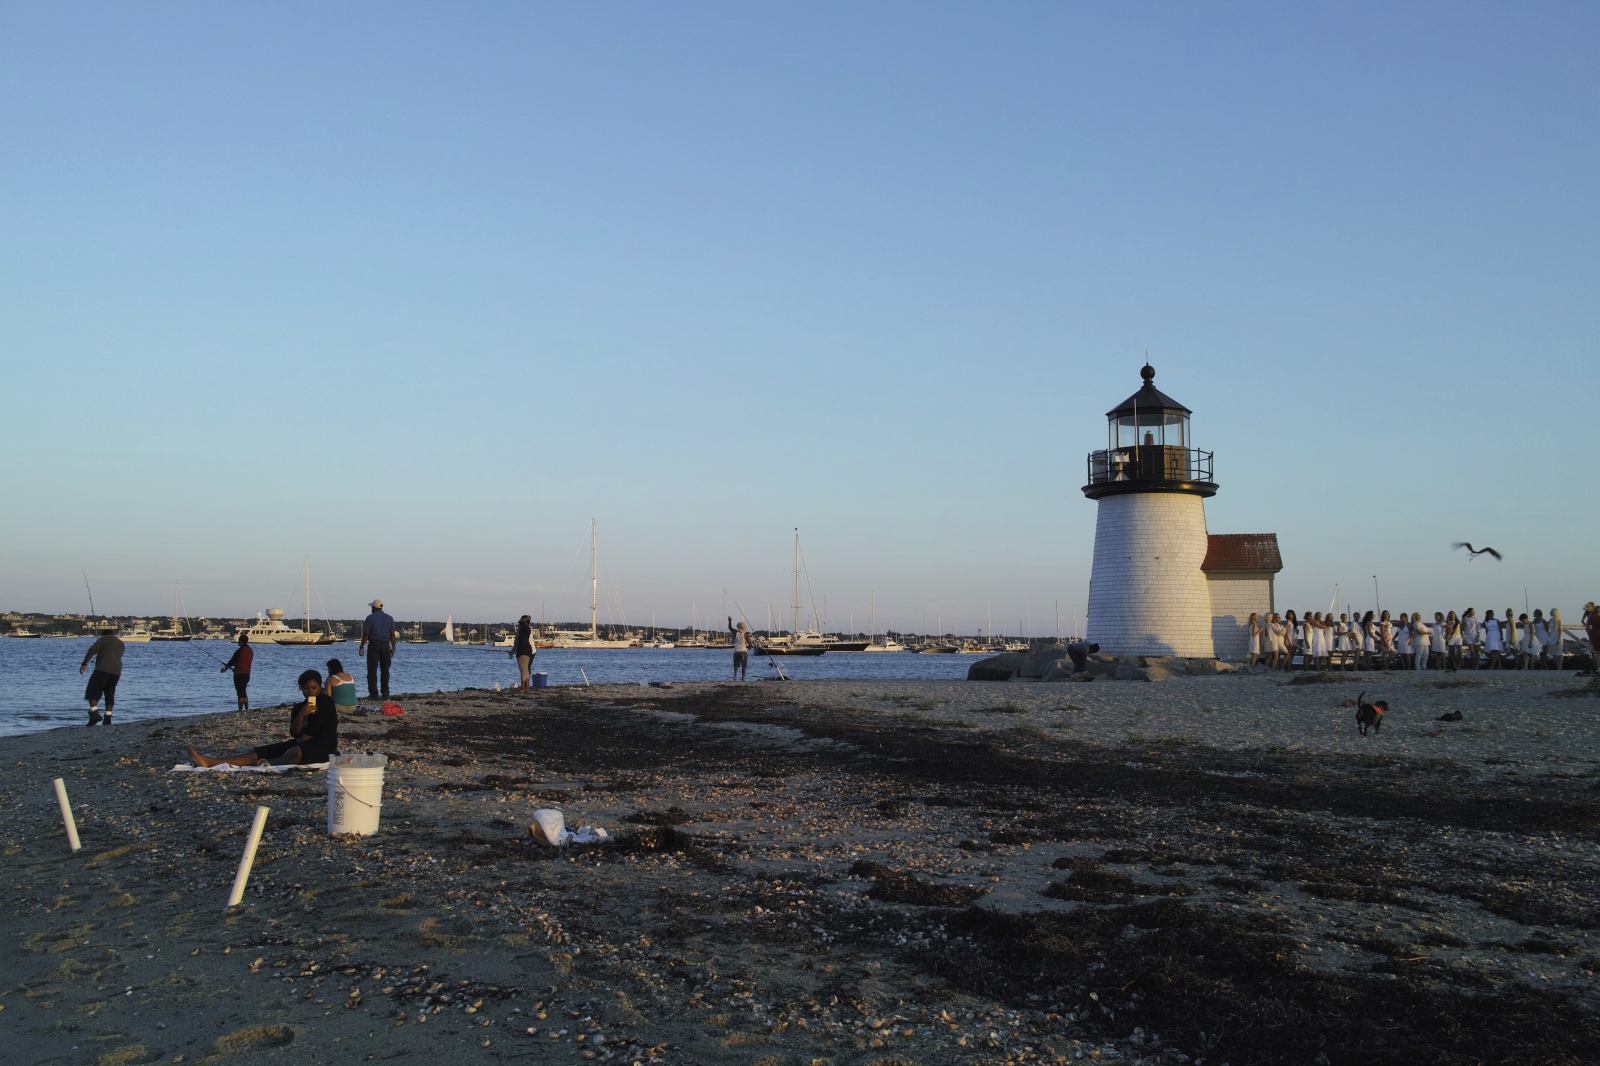 At the Water's Edge - Fishermen. Bachelorette Party and Lighthouse, Brant...